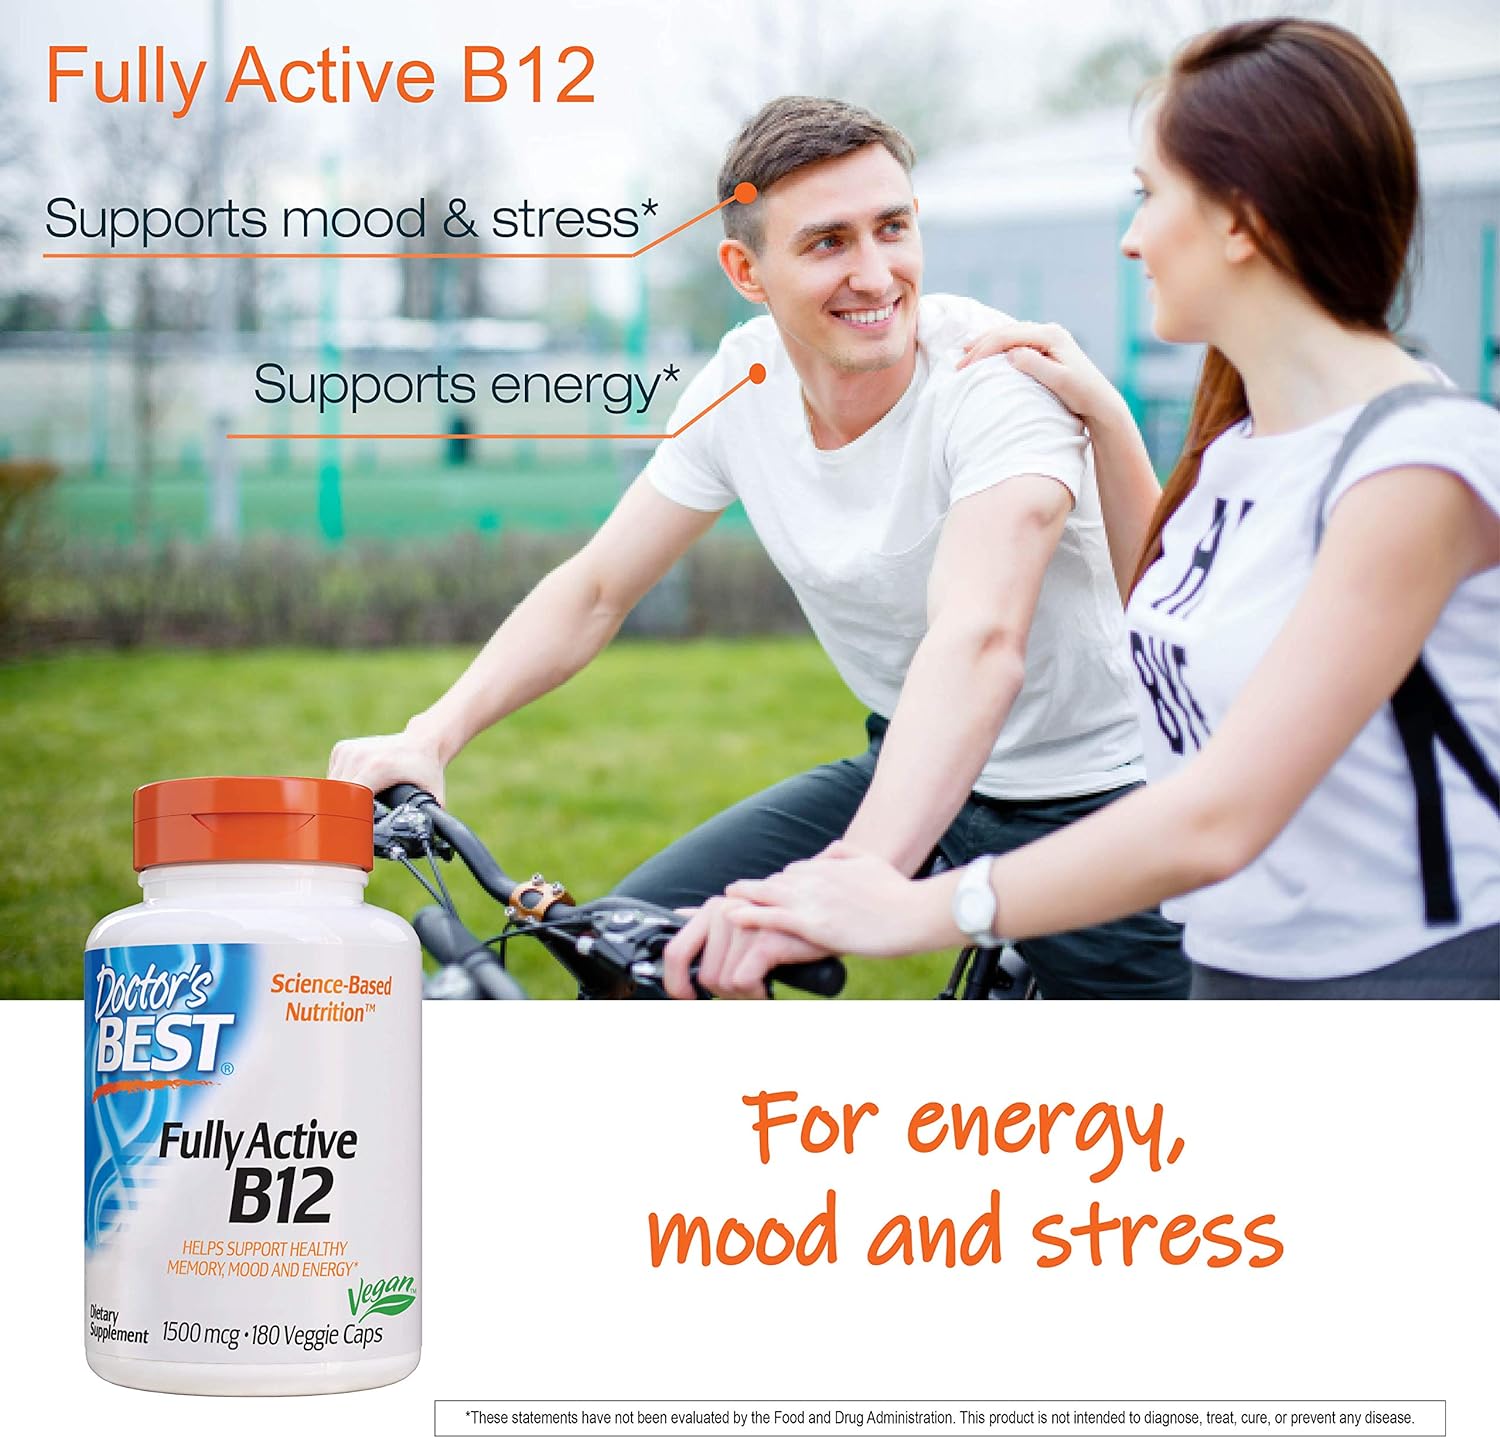 Doctors Best Fully Active B12 1500 Mcg, Supports Energy, Mood, Circulation, Non-GMO, Vegan, Gluten Free, 180 Count